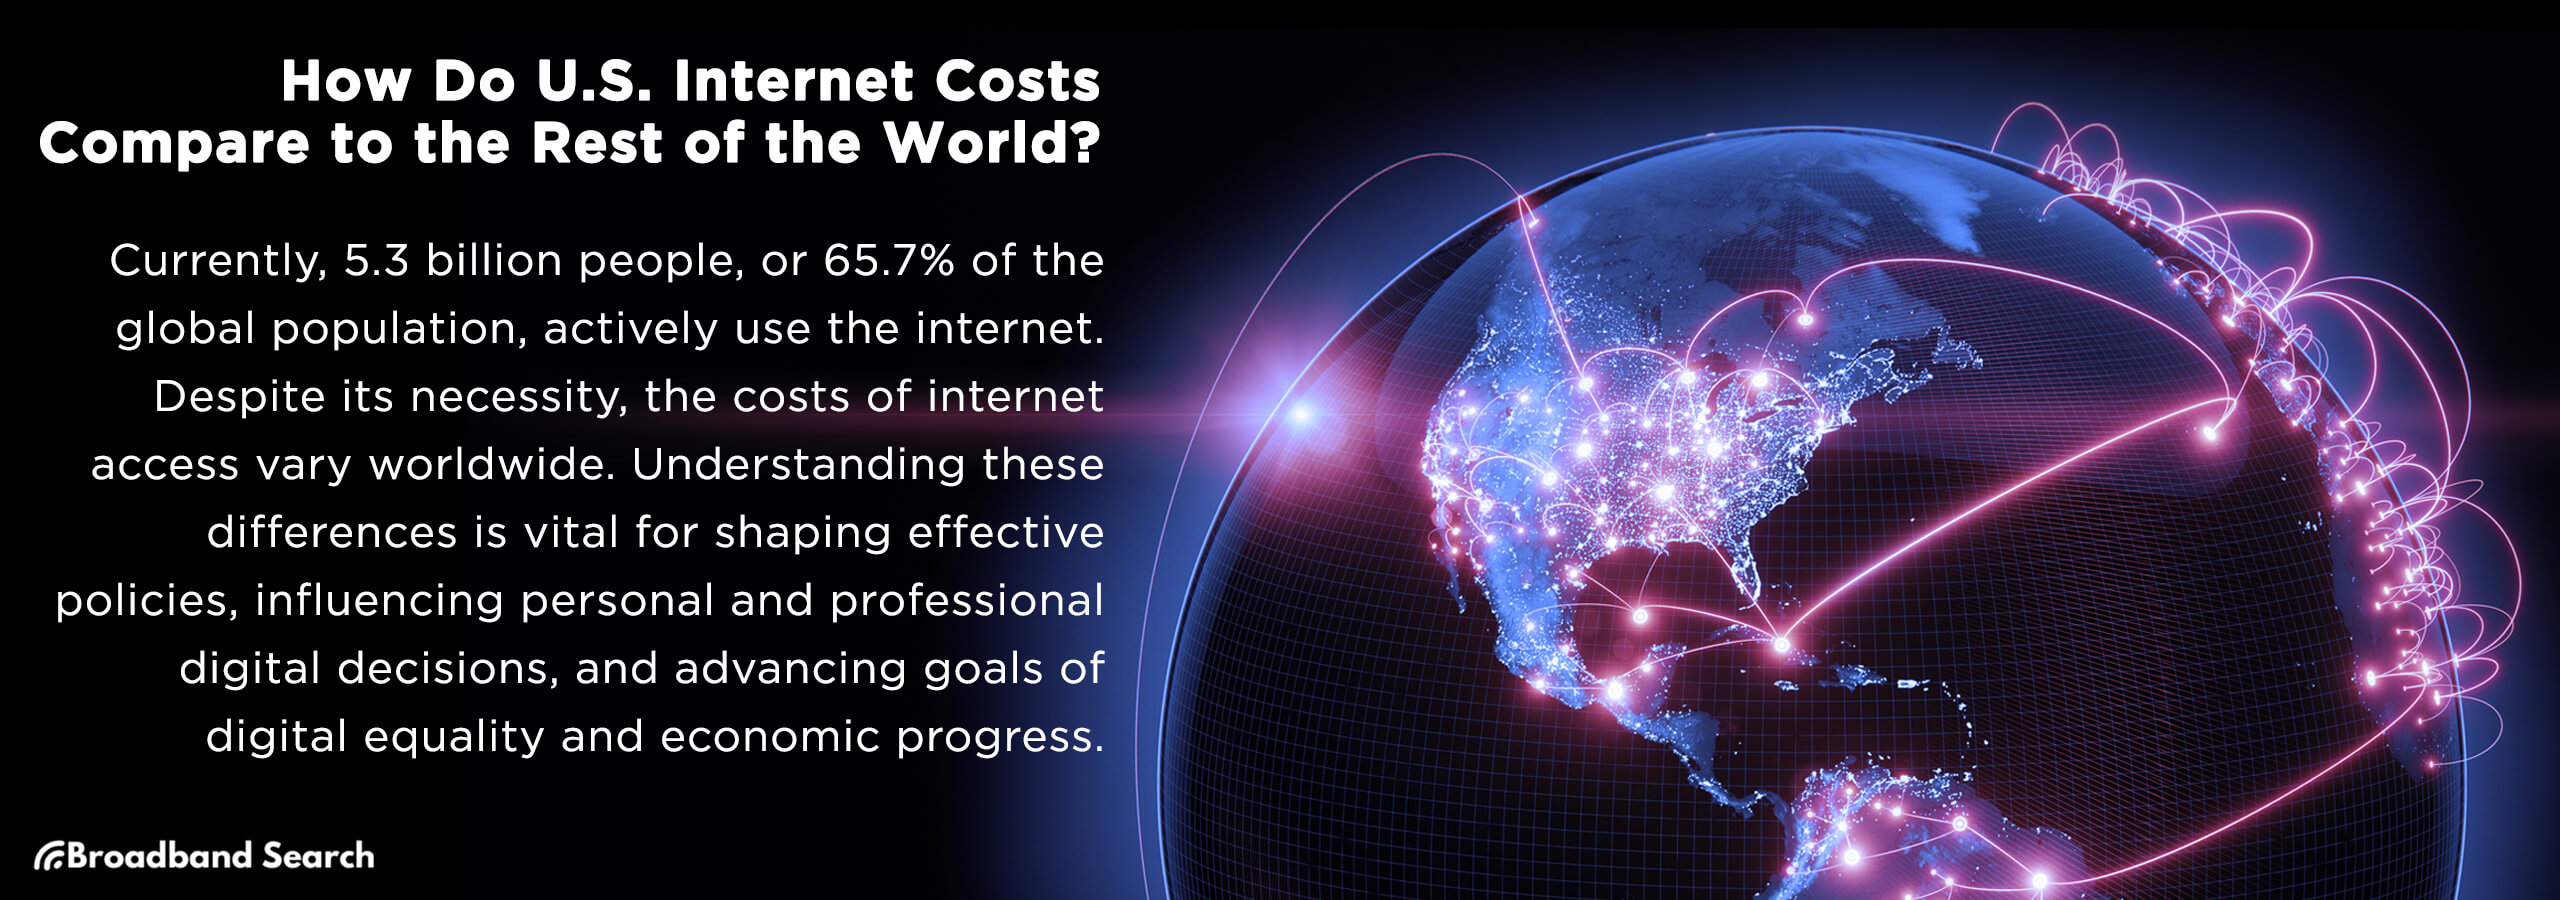 How Do U.S. Internet Costs Compare To The Rest Of The World?